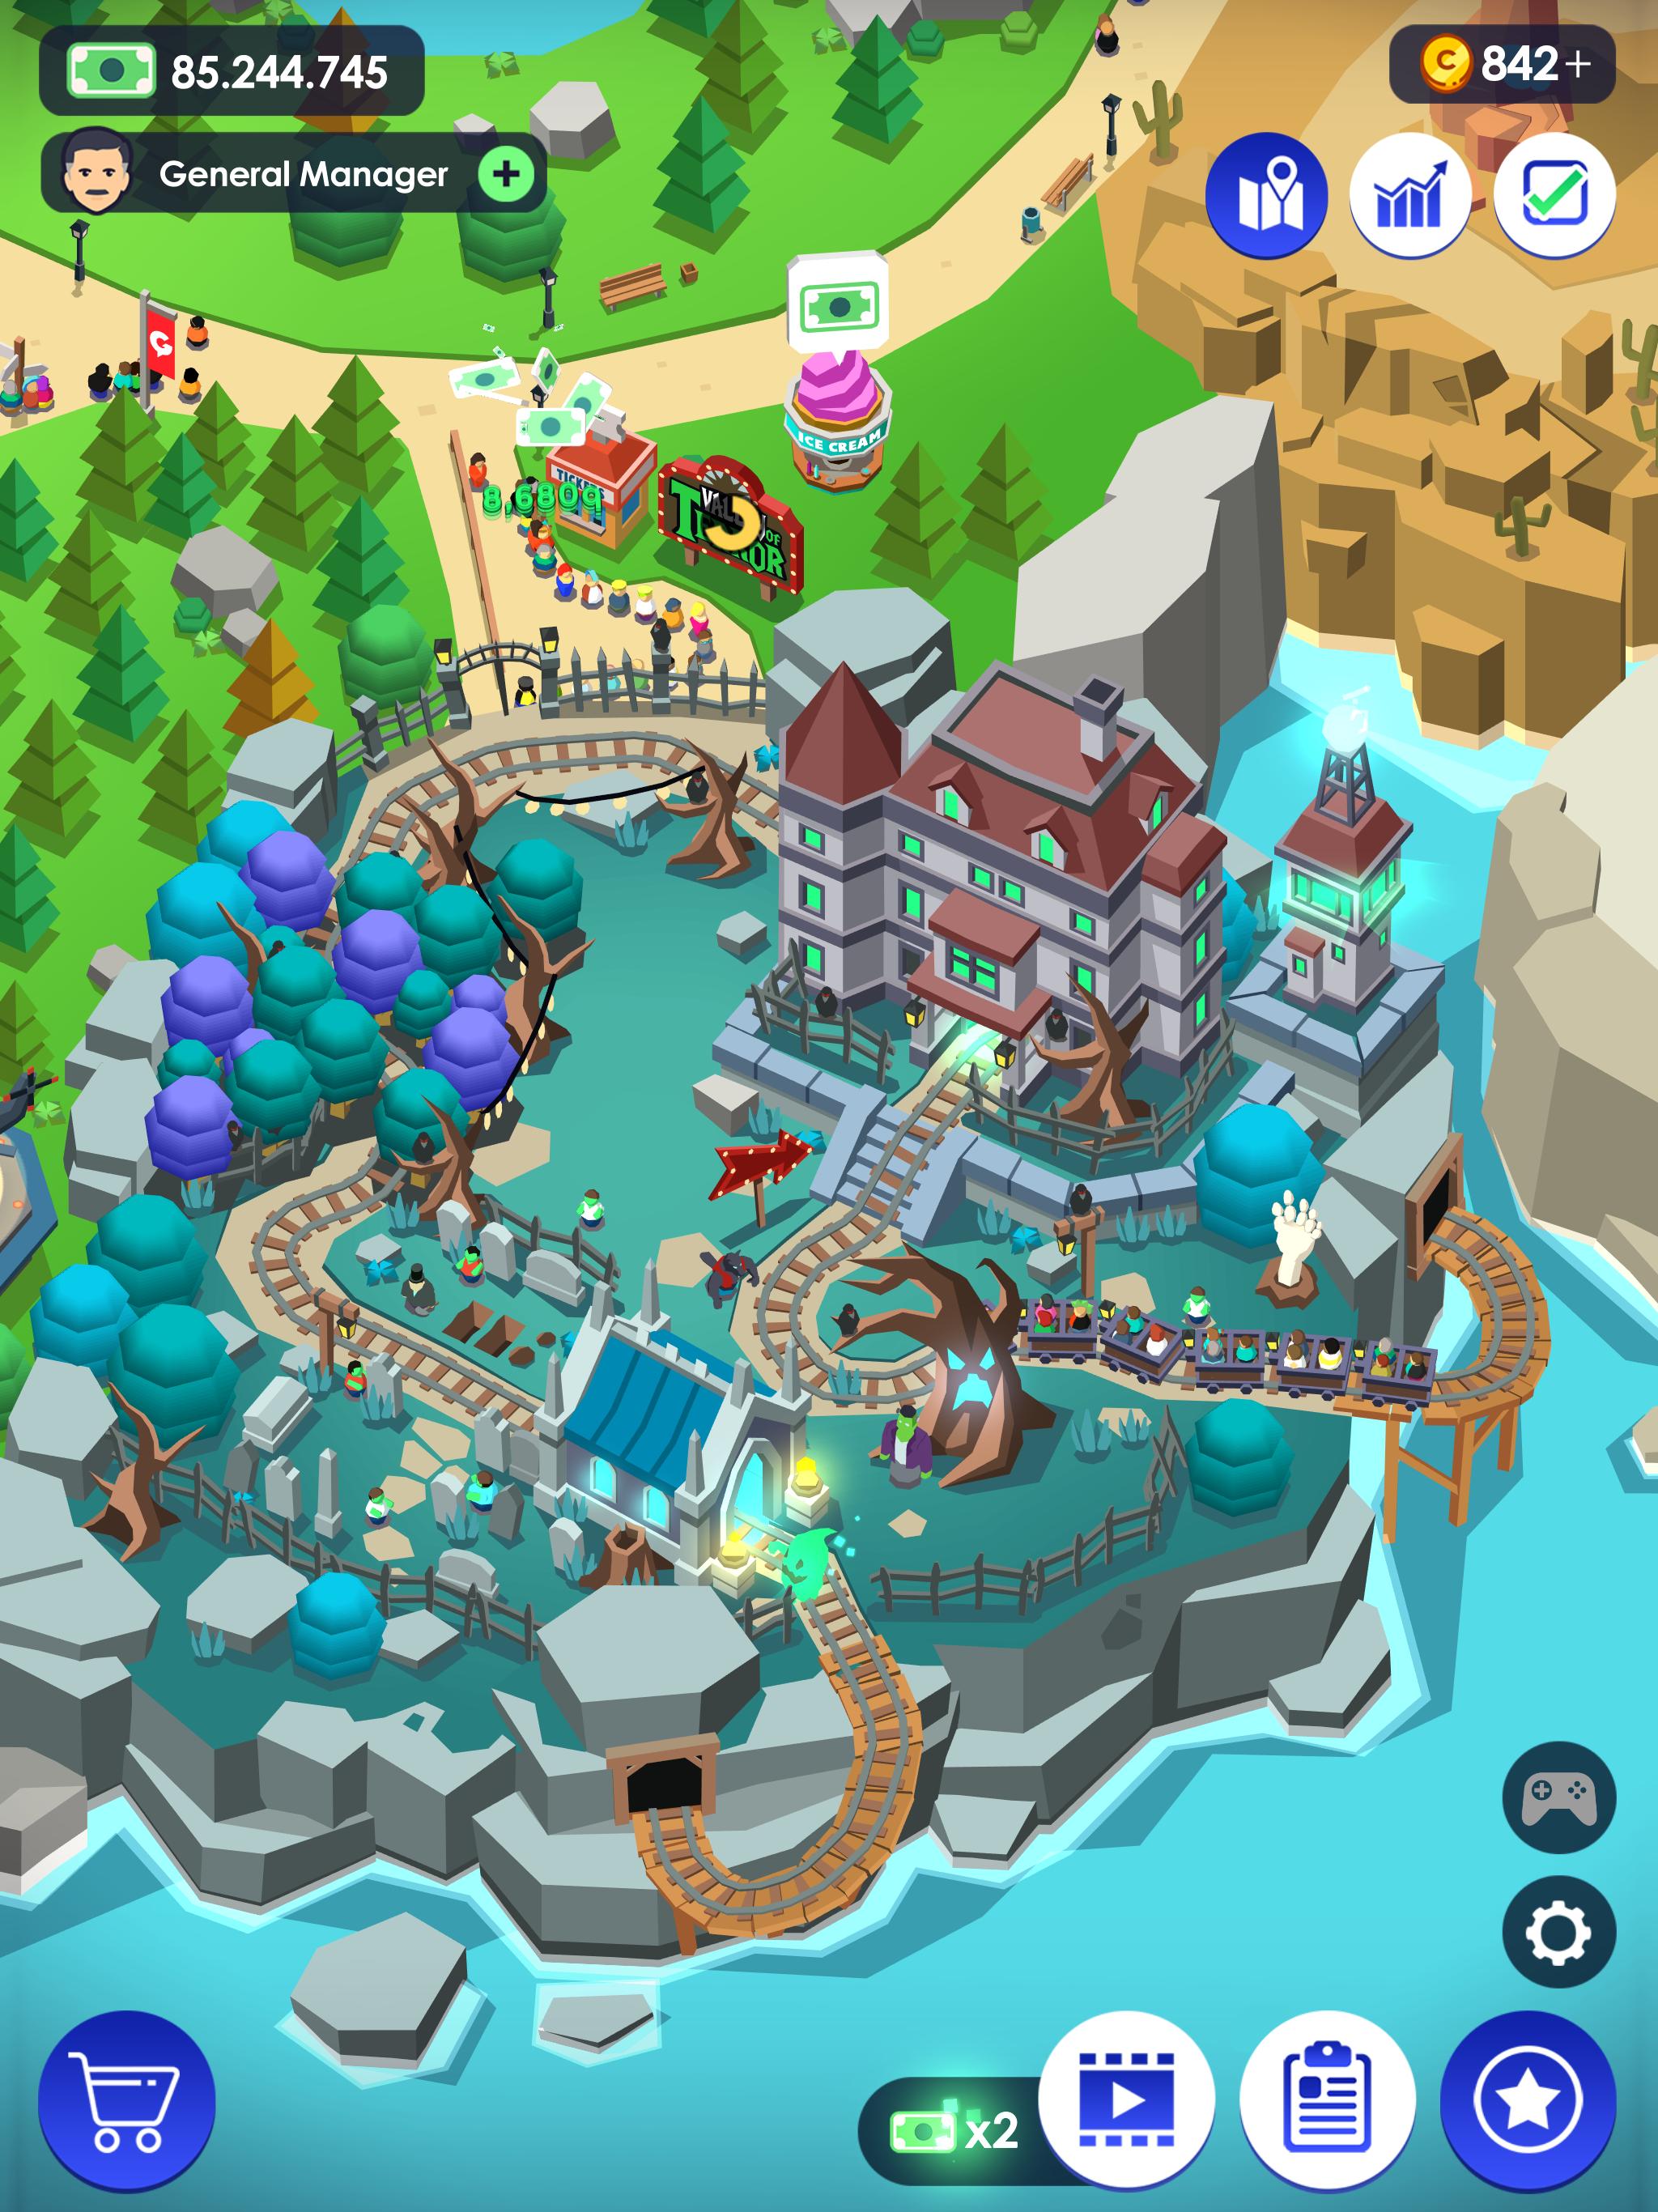 Idle games mod. Игра Theme Park Tycoon. Парк в игре Theme Park Tycoon. Игра Theme Park Tycoon 2. Idle Theme Park Tycoon Recreation game.